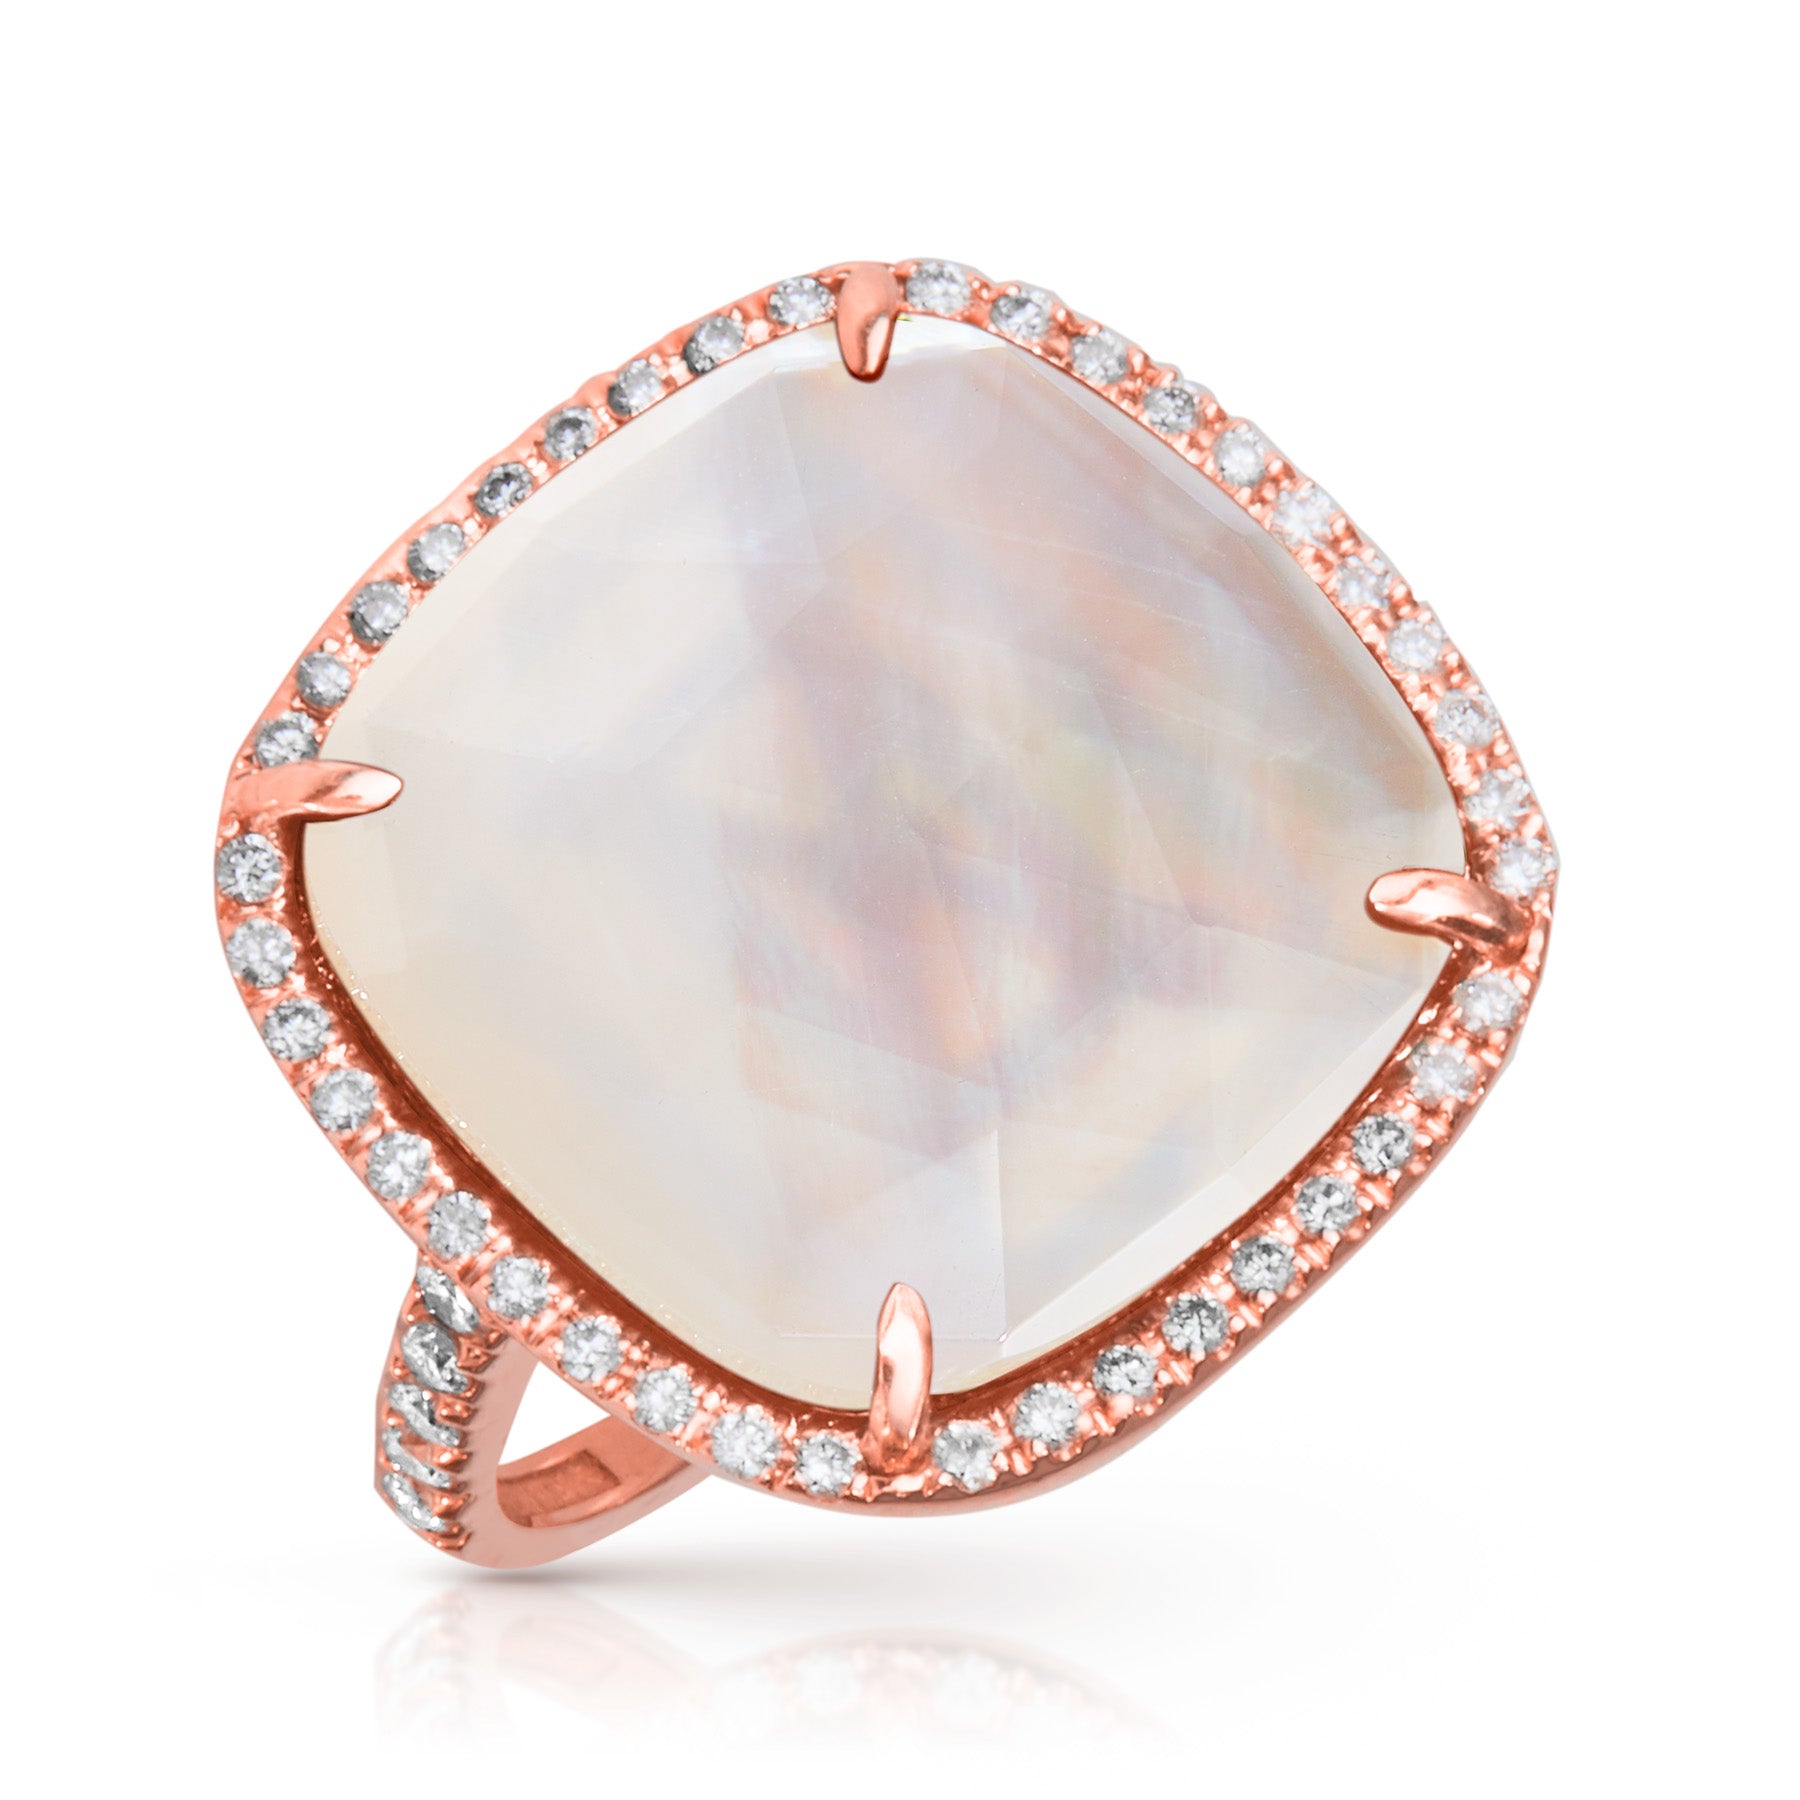 14KT Rose Gold Diamond Mother of Pearl Doublet Cushion Cut Cocktail Ring